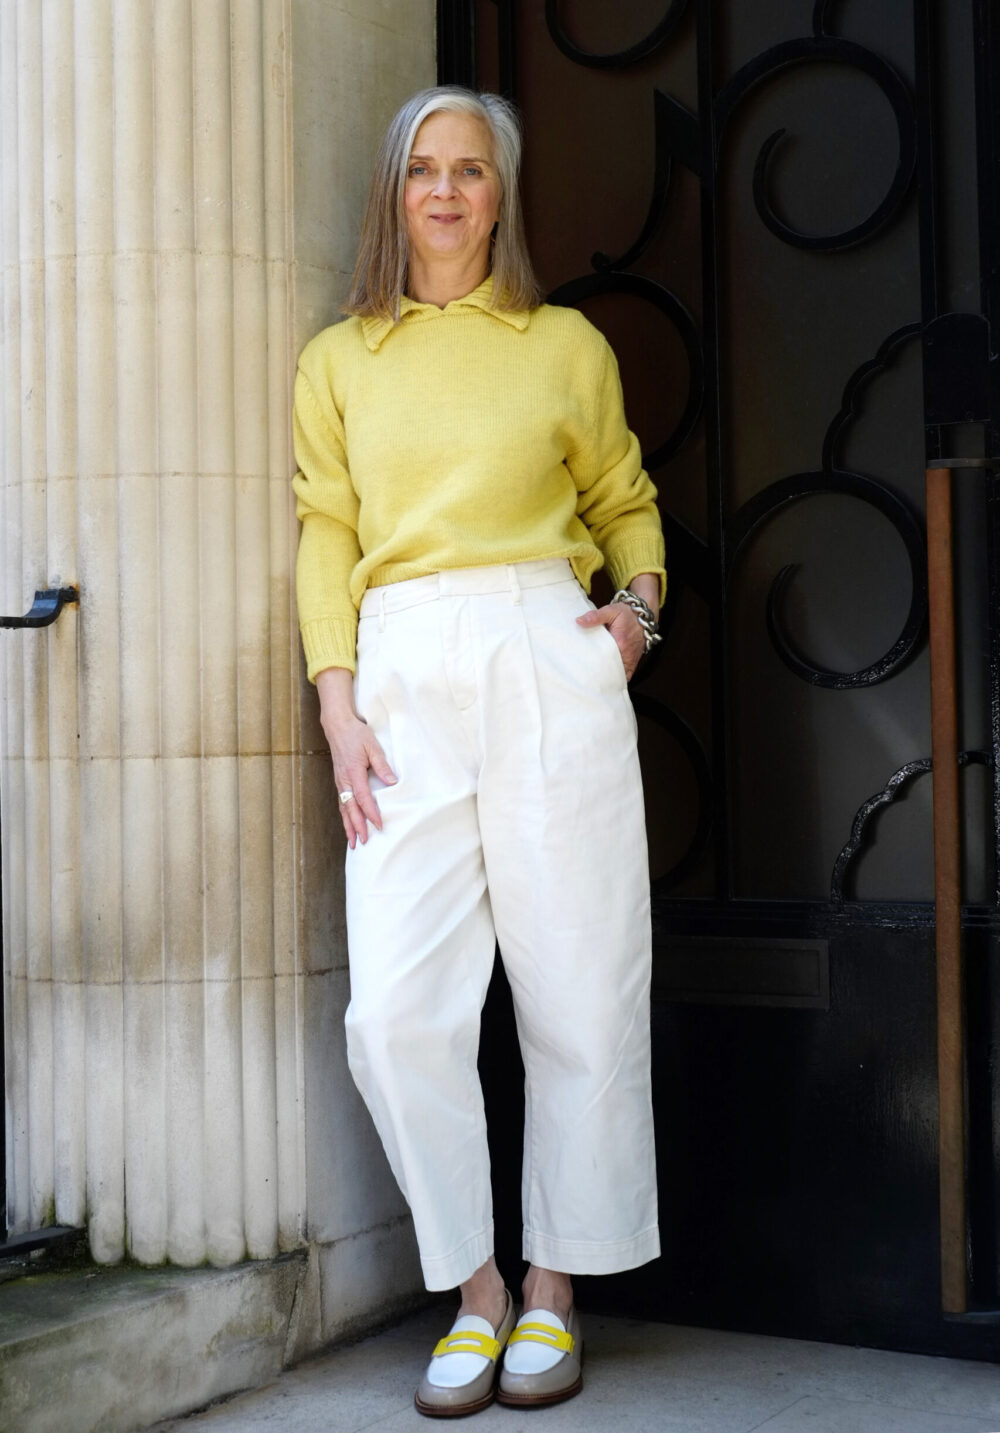 Easy spring updates: try a burst of yellow to boost the basics